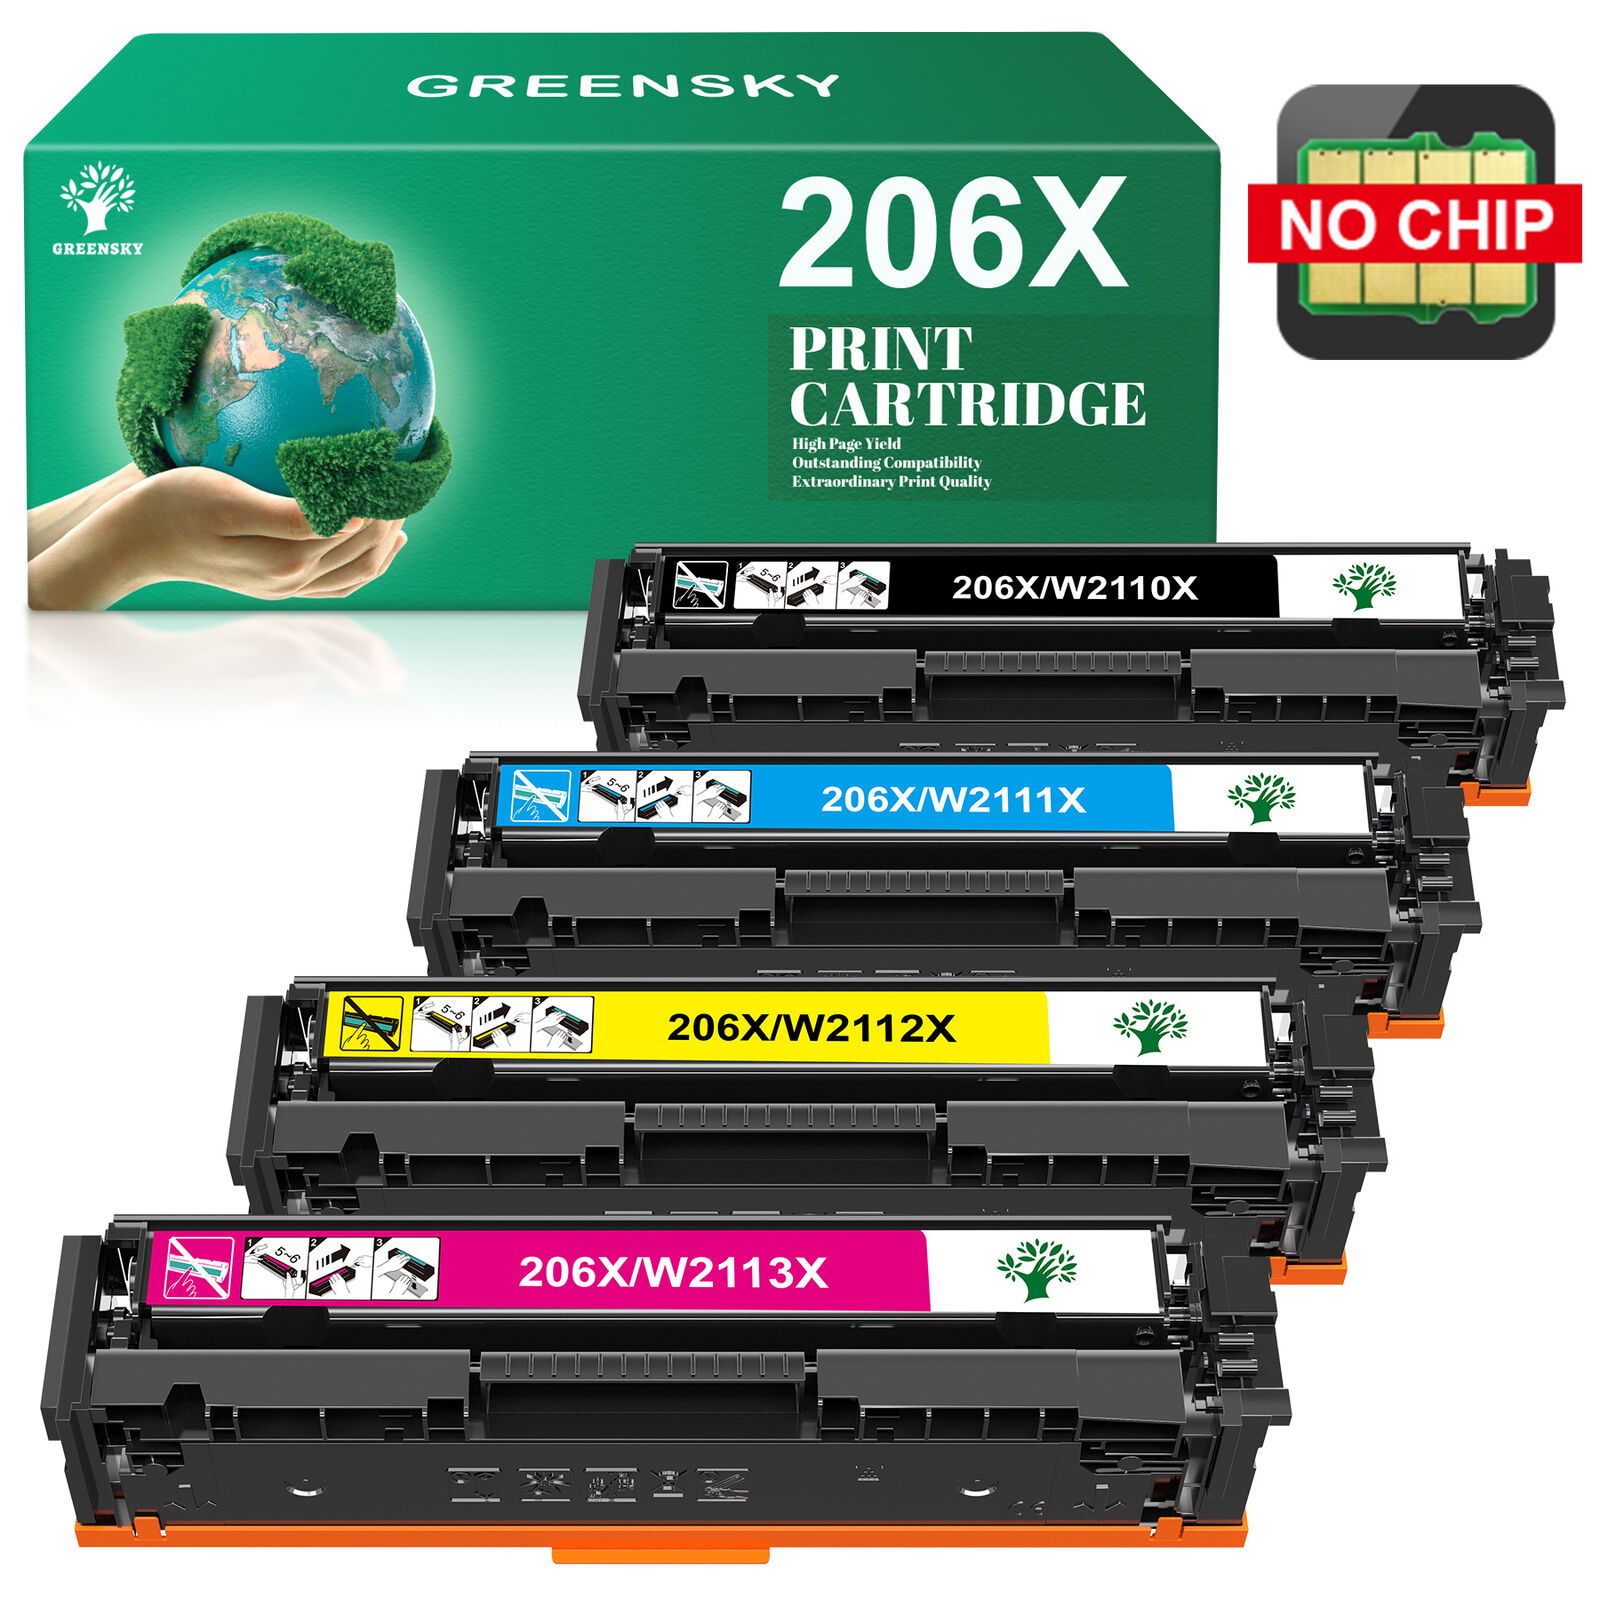 4 Pack W2110X Toner Replacement for HP 206X LaserJet Pro MFP M282nw No Chip